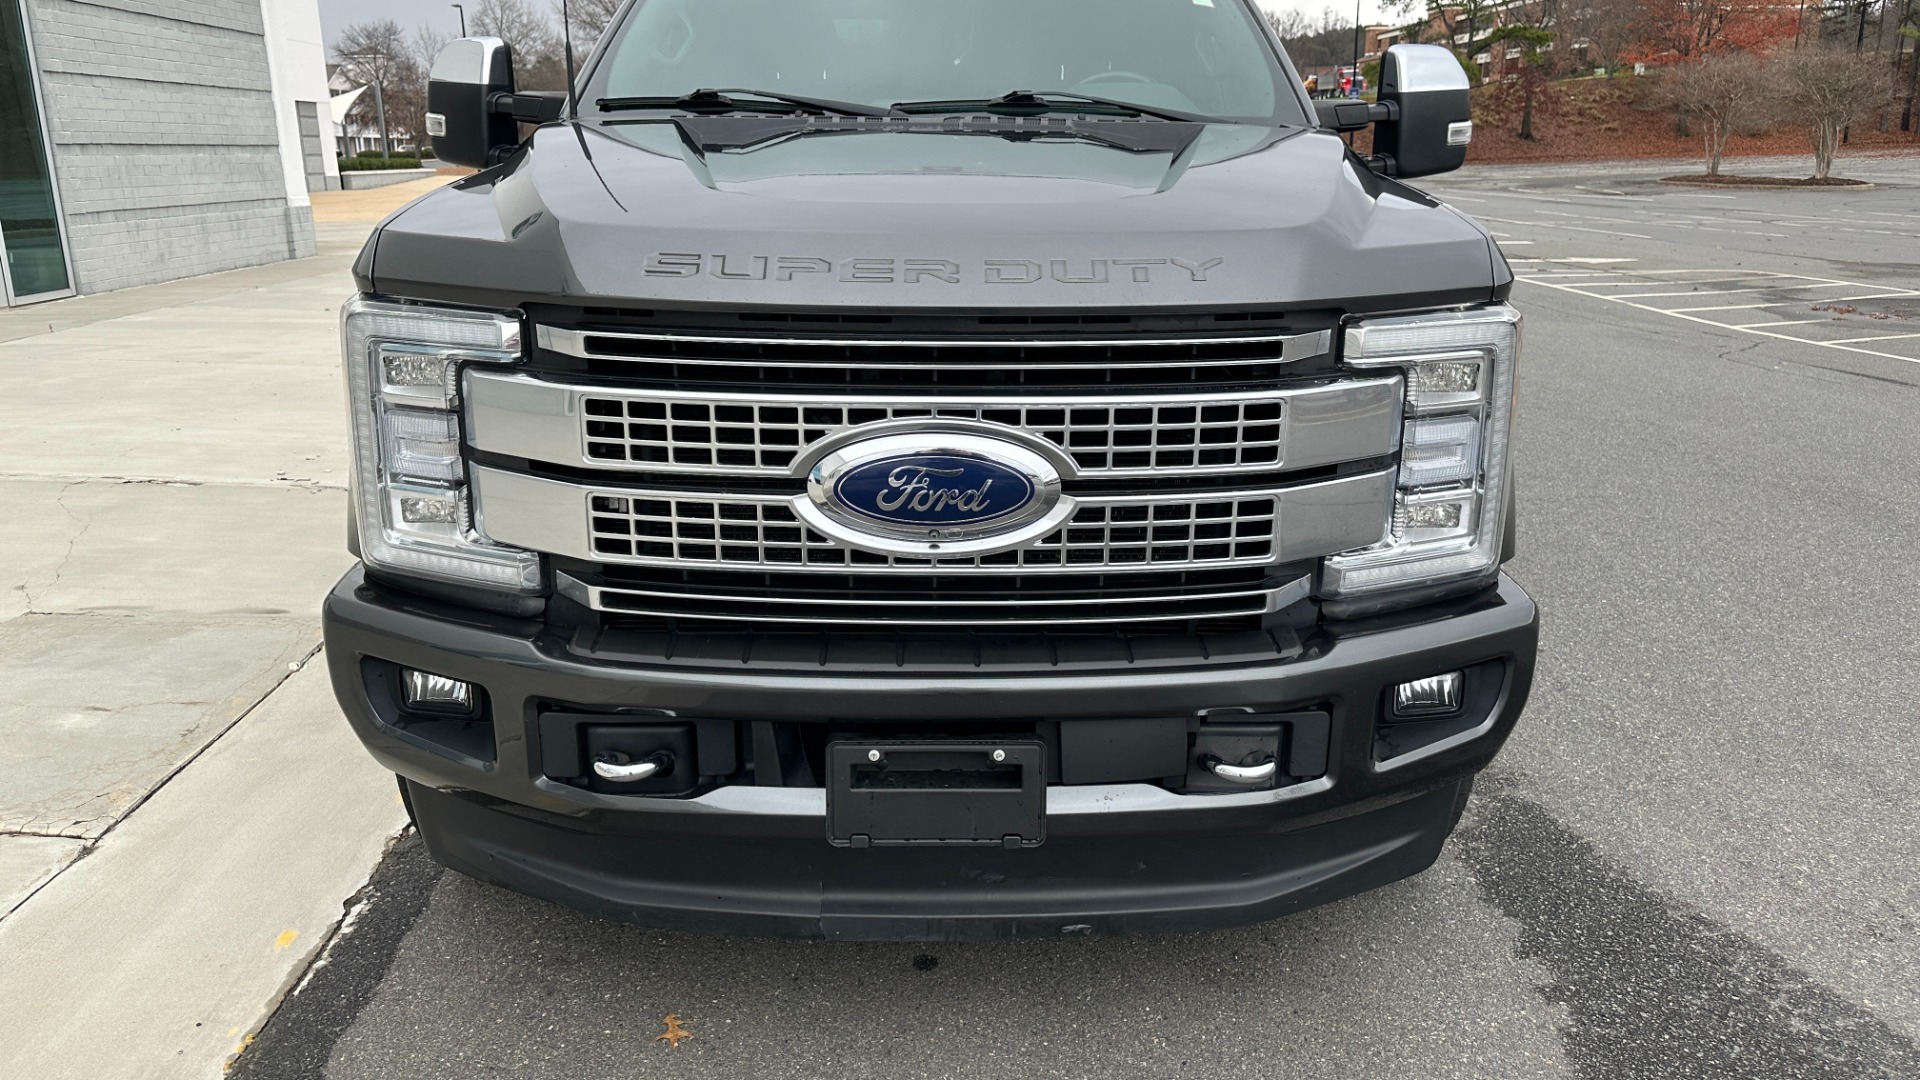 Used 2017 Ford Super Duty F-250 SRW PLATINUM / FOX SHOCKS / 6.7 DIESEL / FX4 OFFROAD / ADAPTIVE CRUISE for sale $54,995 at Formula Imports in Charlotte NC 28227 7